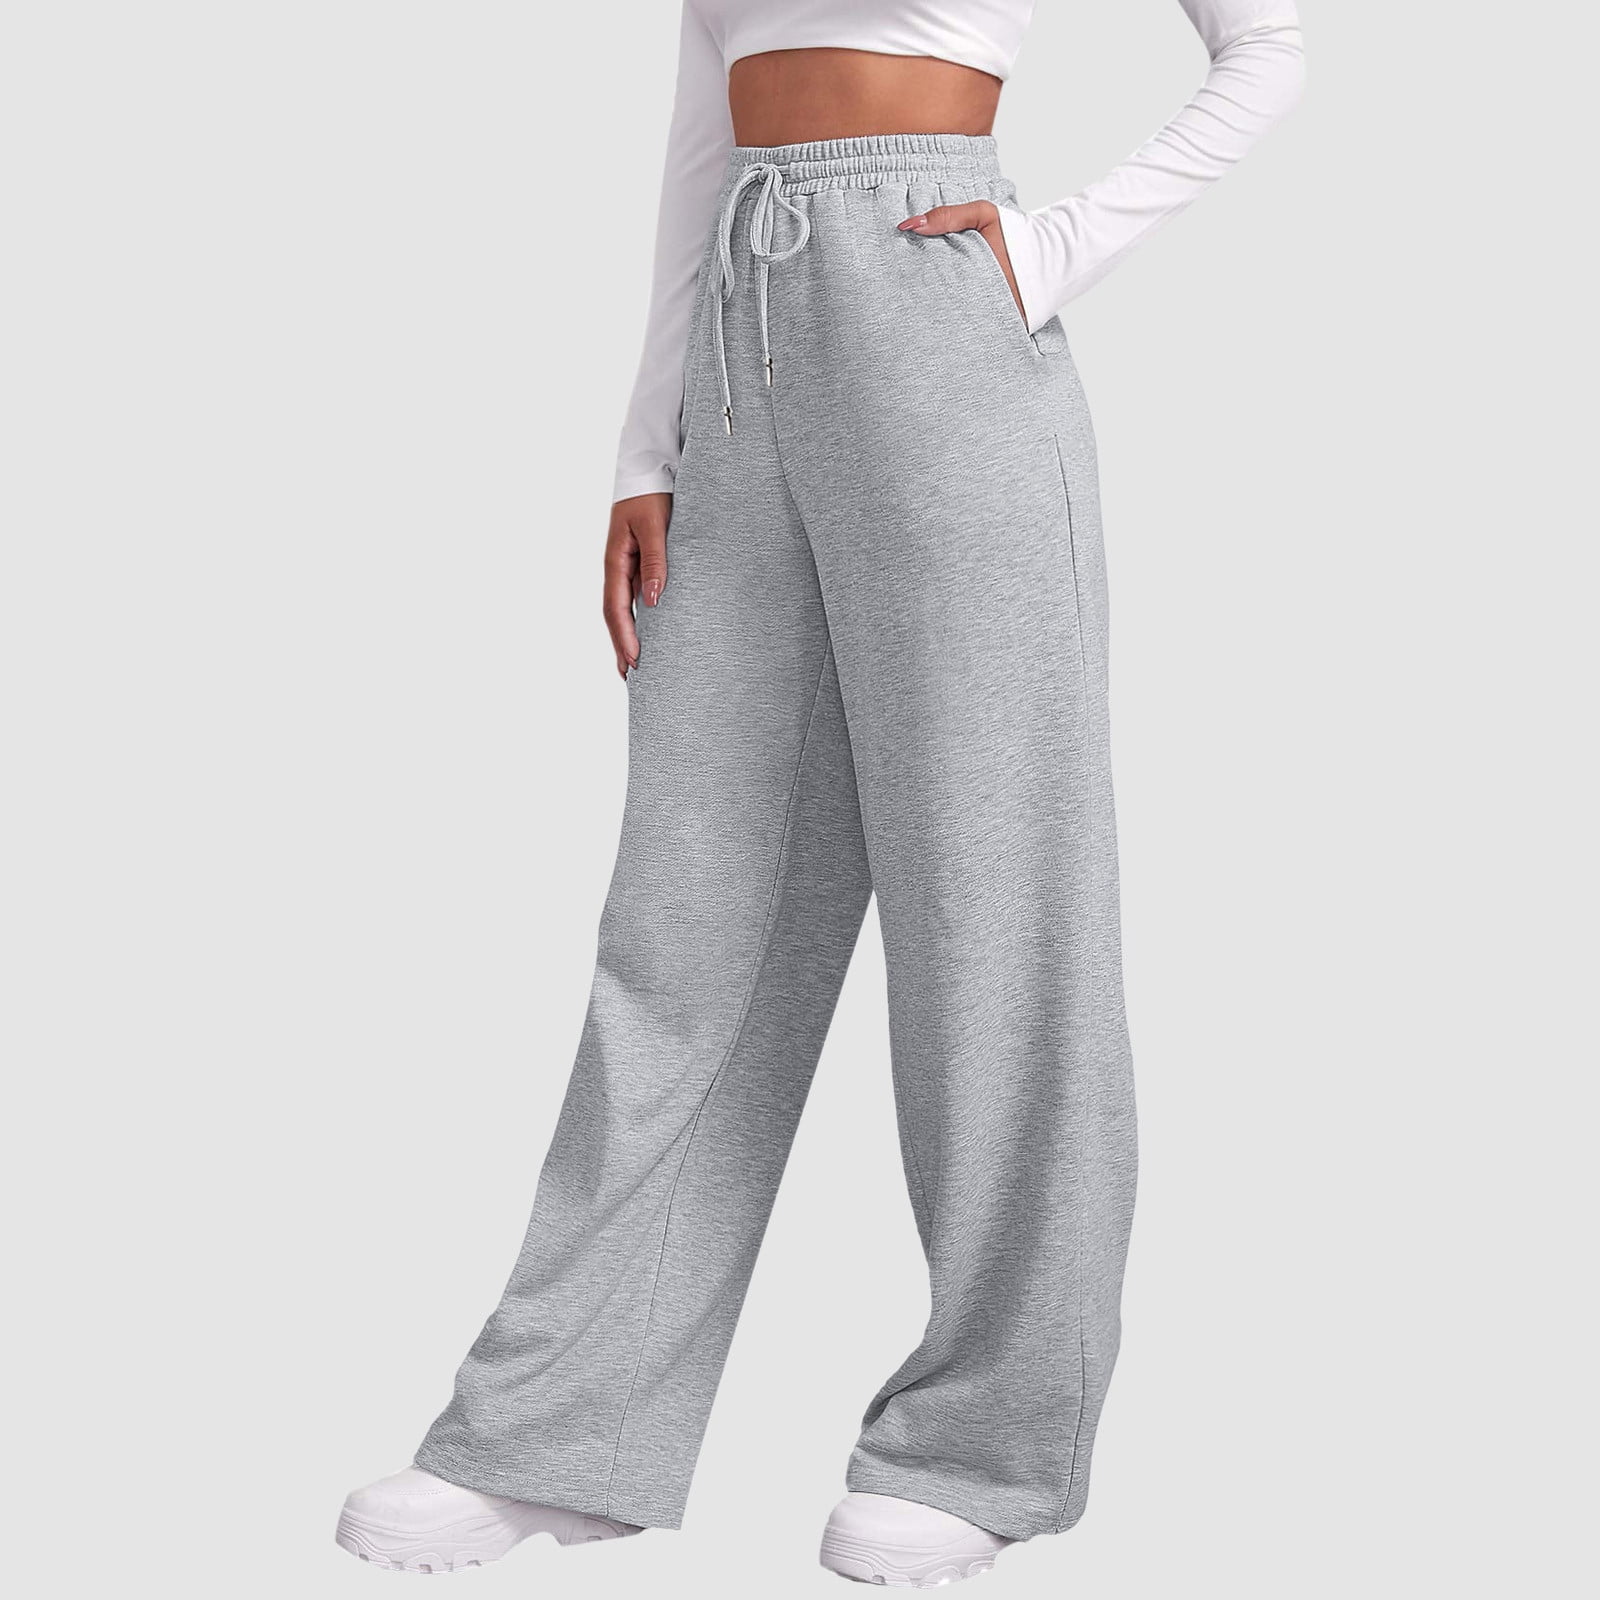 Don't Miss Out! Flare Leggings, Womens Pants, Women's Clothing, Straight  Leg Sweatpants for Women, Going Out Pants for Women, Petite Joggers for  Women Petite Length, Soft Leggingsflared Pants 